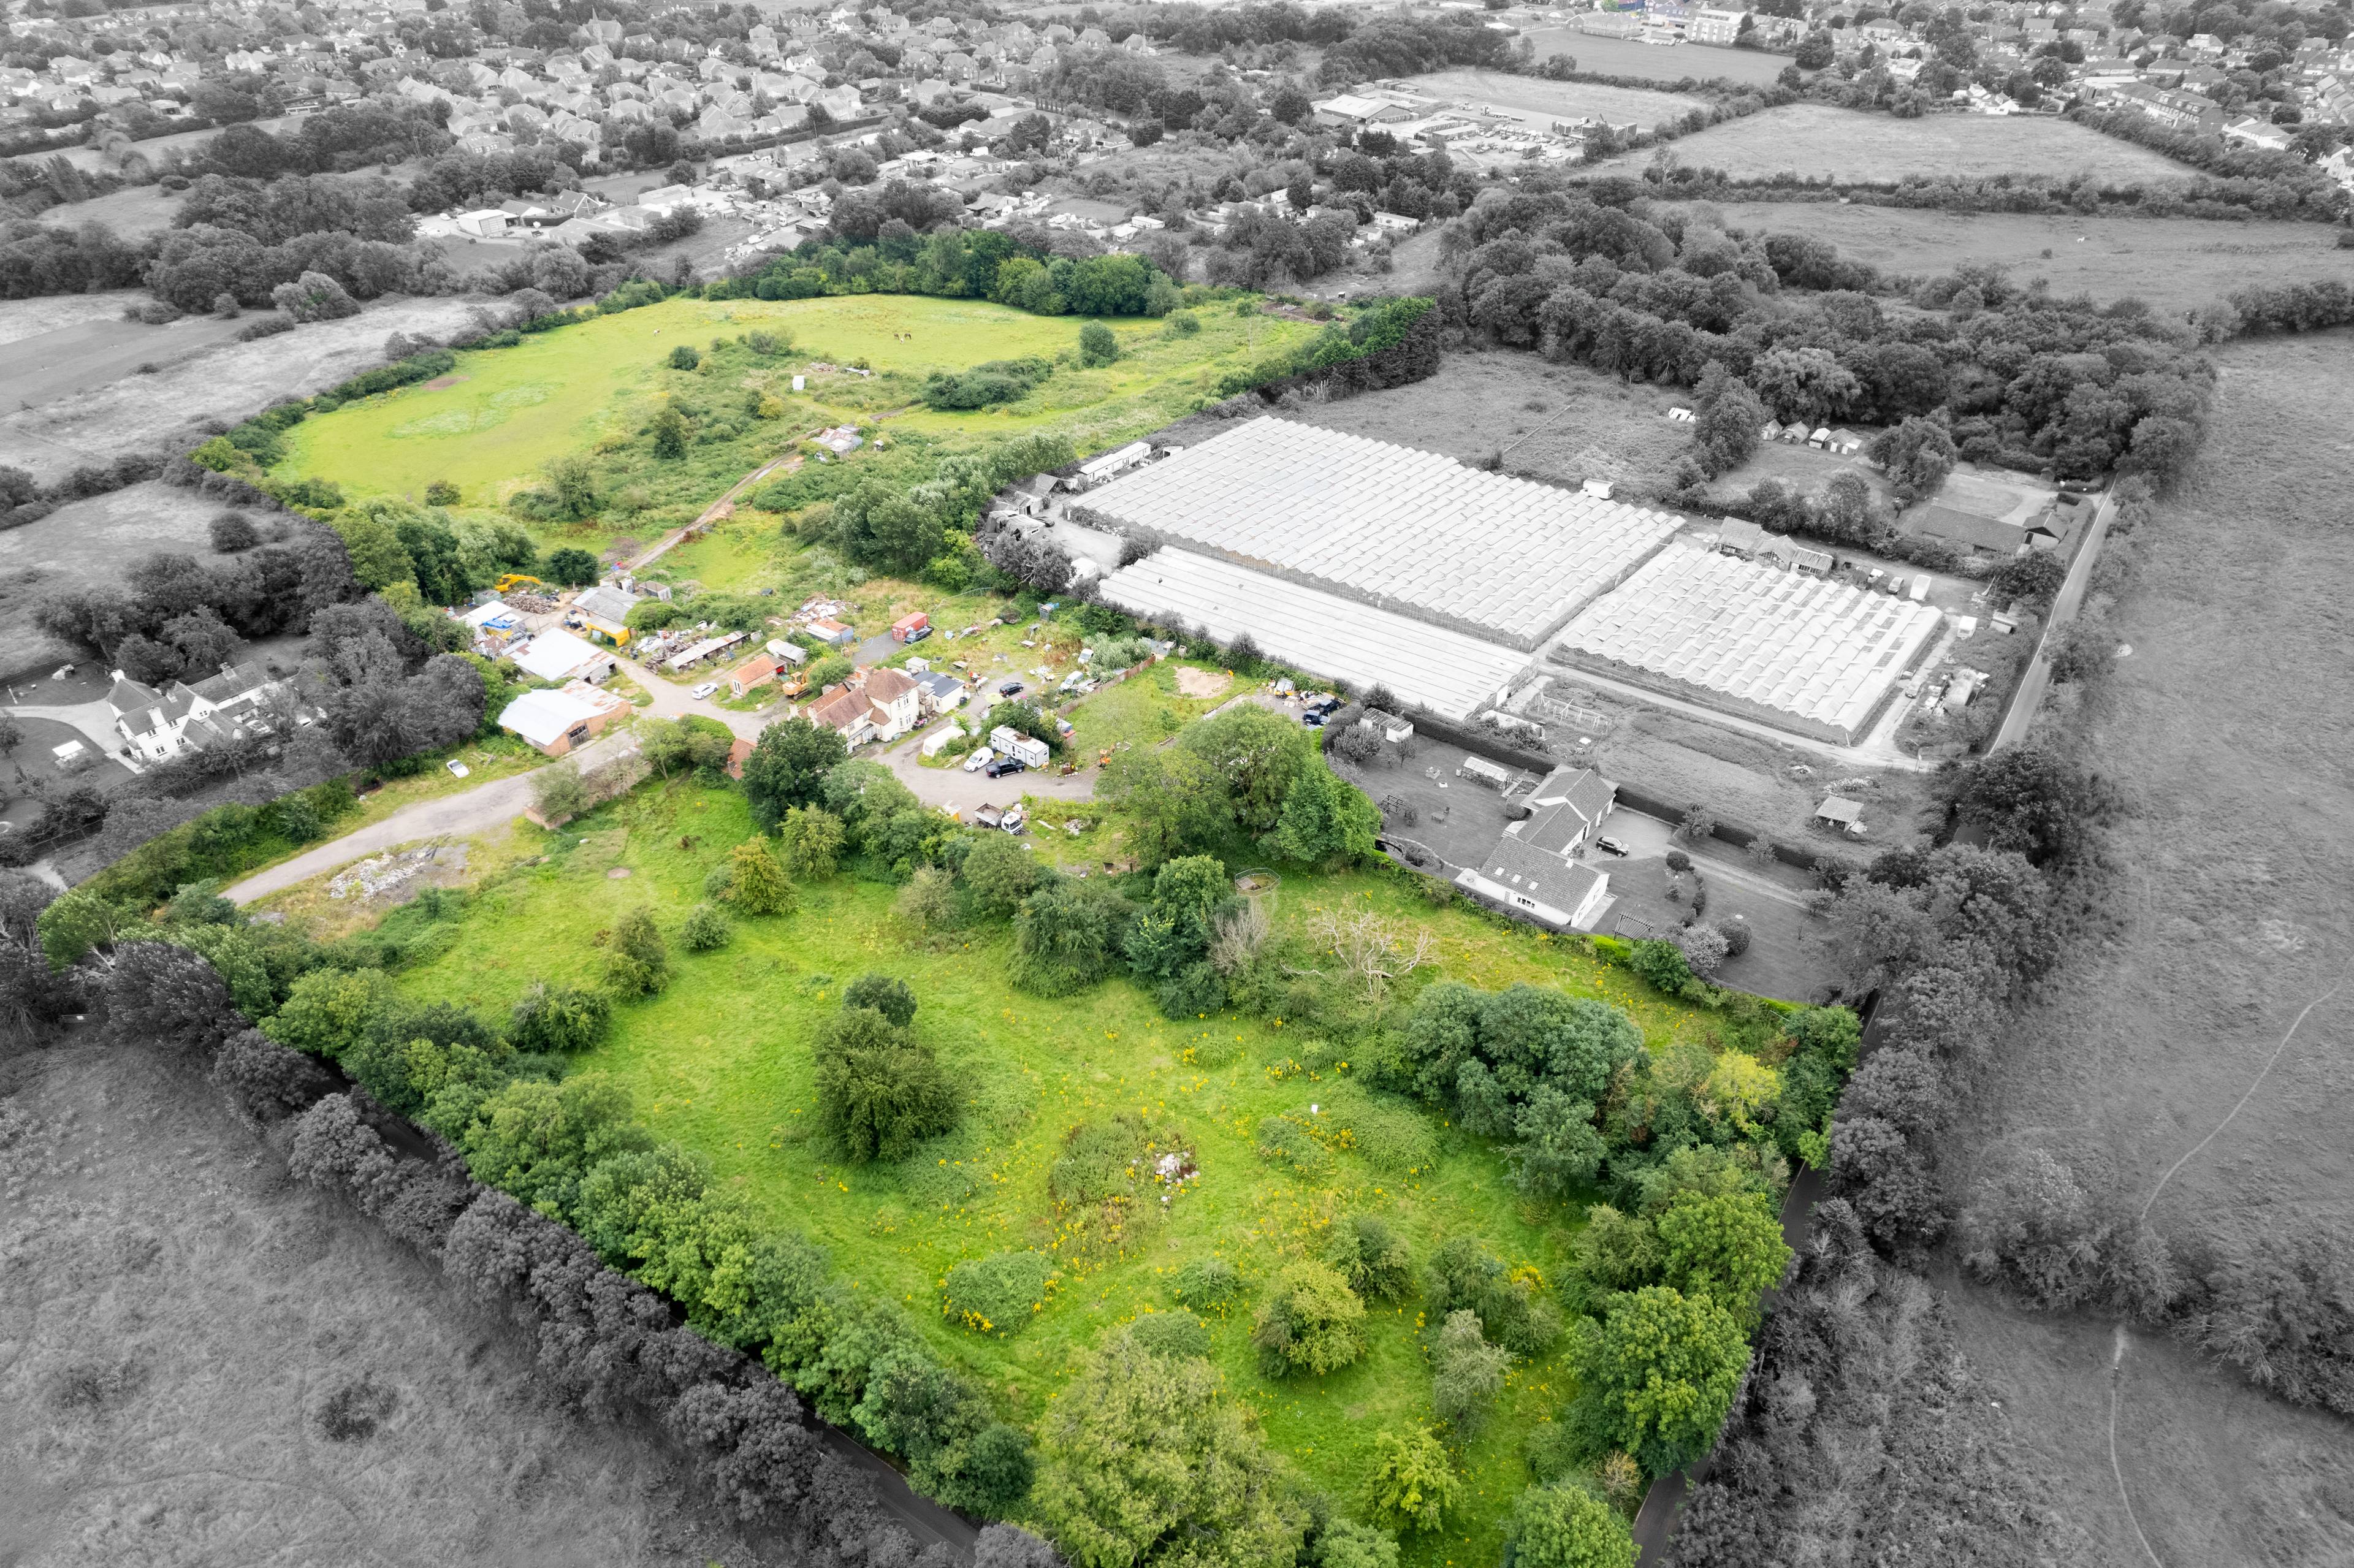 Residential Development Site for sale, Existing Farm House with various outbuildings set in around 16 acres of land.